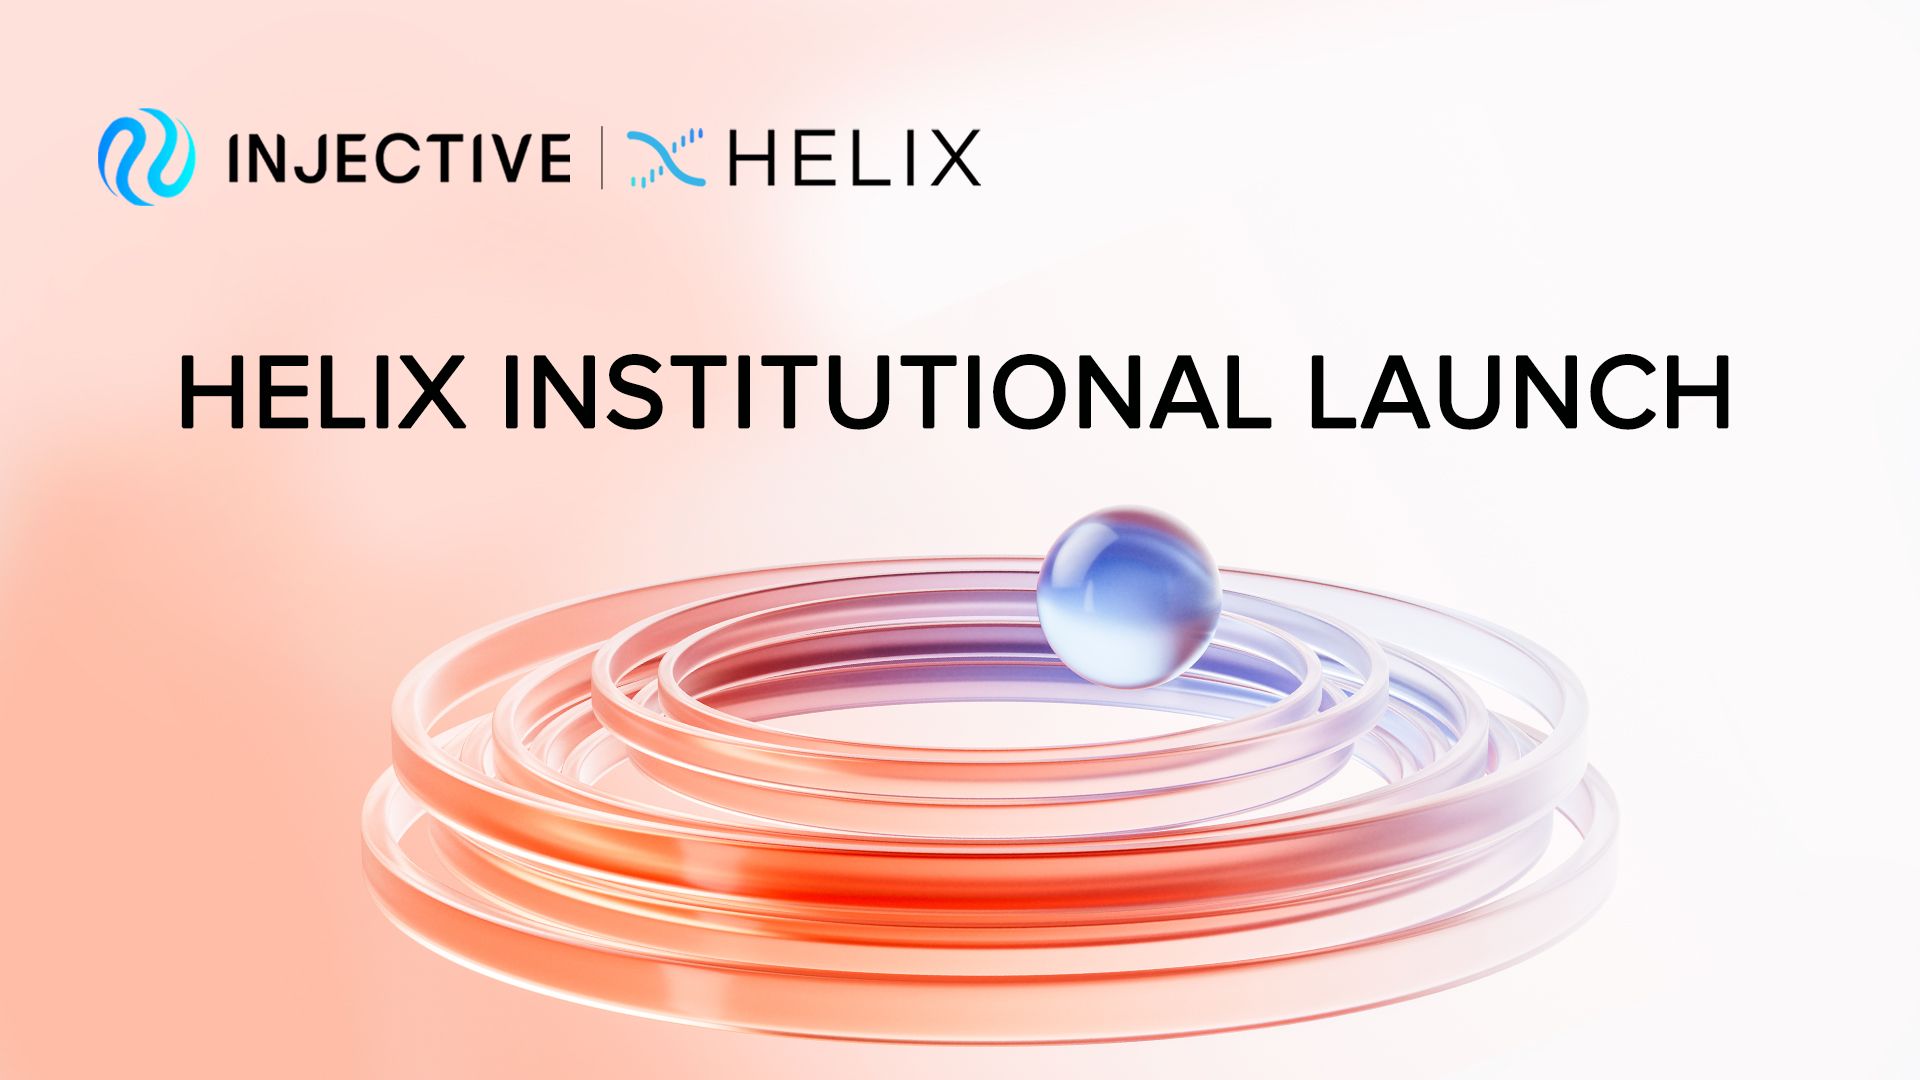 Helix Institutional Launch